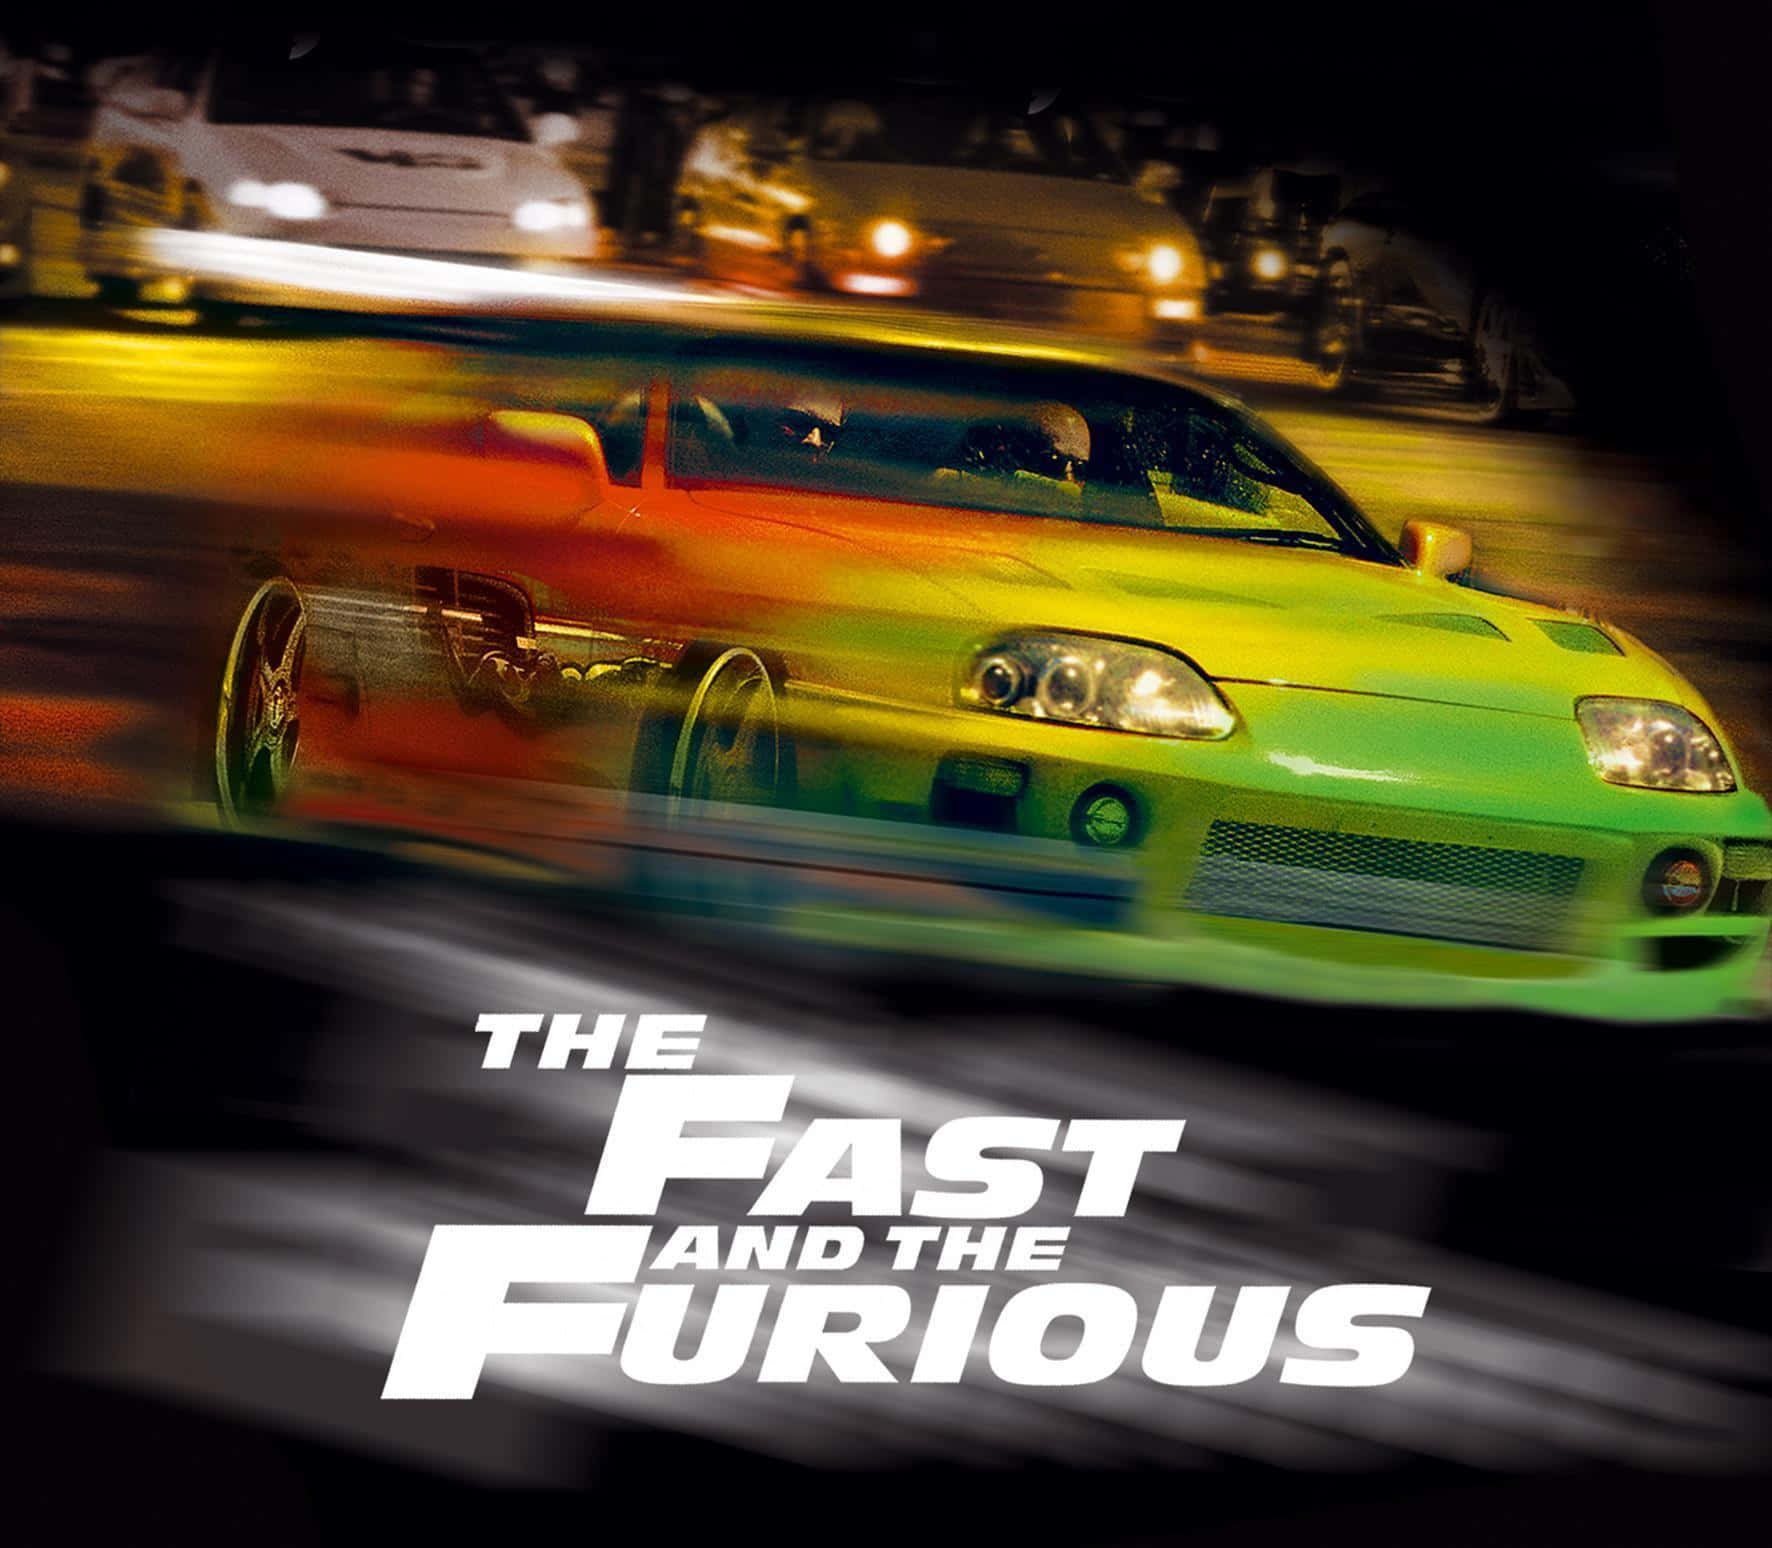 Take on the Fast and Furious challenge Wallpaper